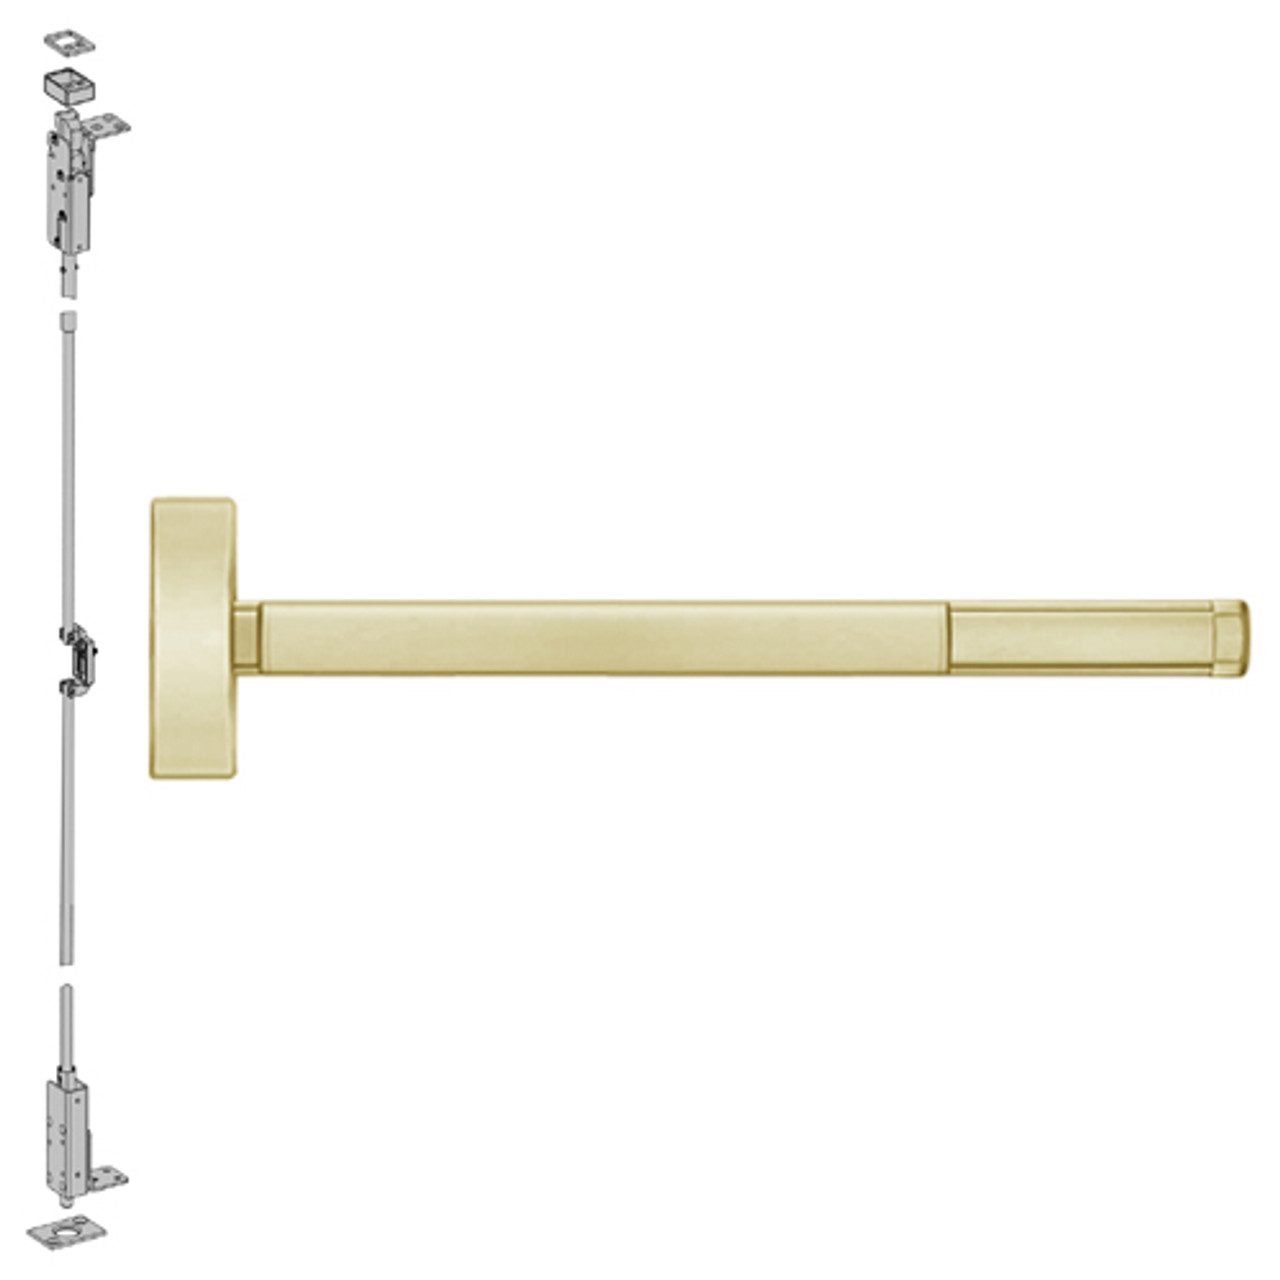 TSFL2705-606-36 PHI 2700 Series Wood Door Concealed Vertical Exit Device with Touchbar Monitoring Switch Prepped for Key Controls Thumb Piece in Satin Brass Finish